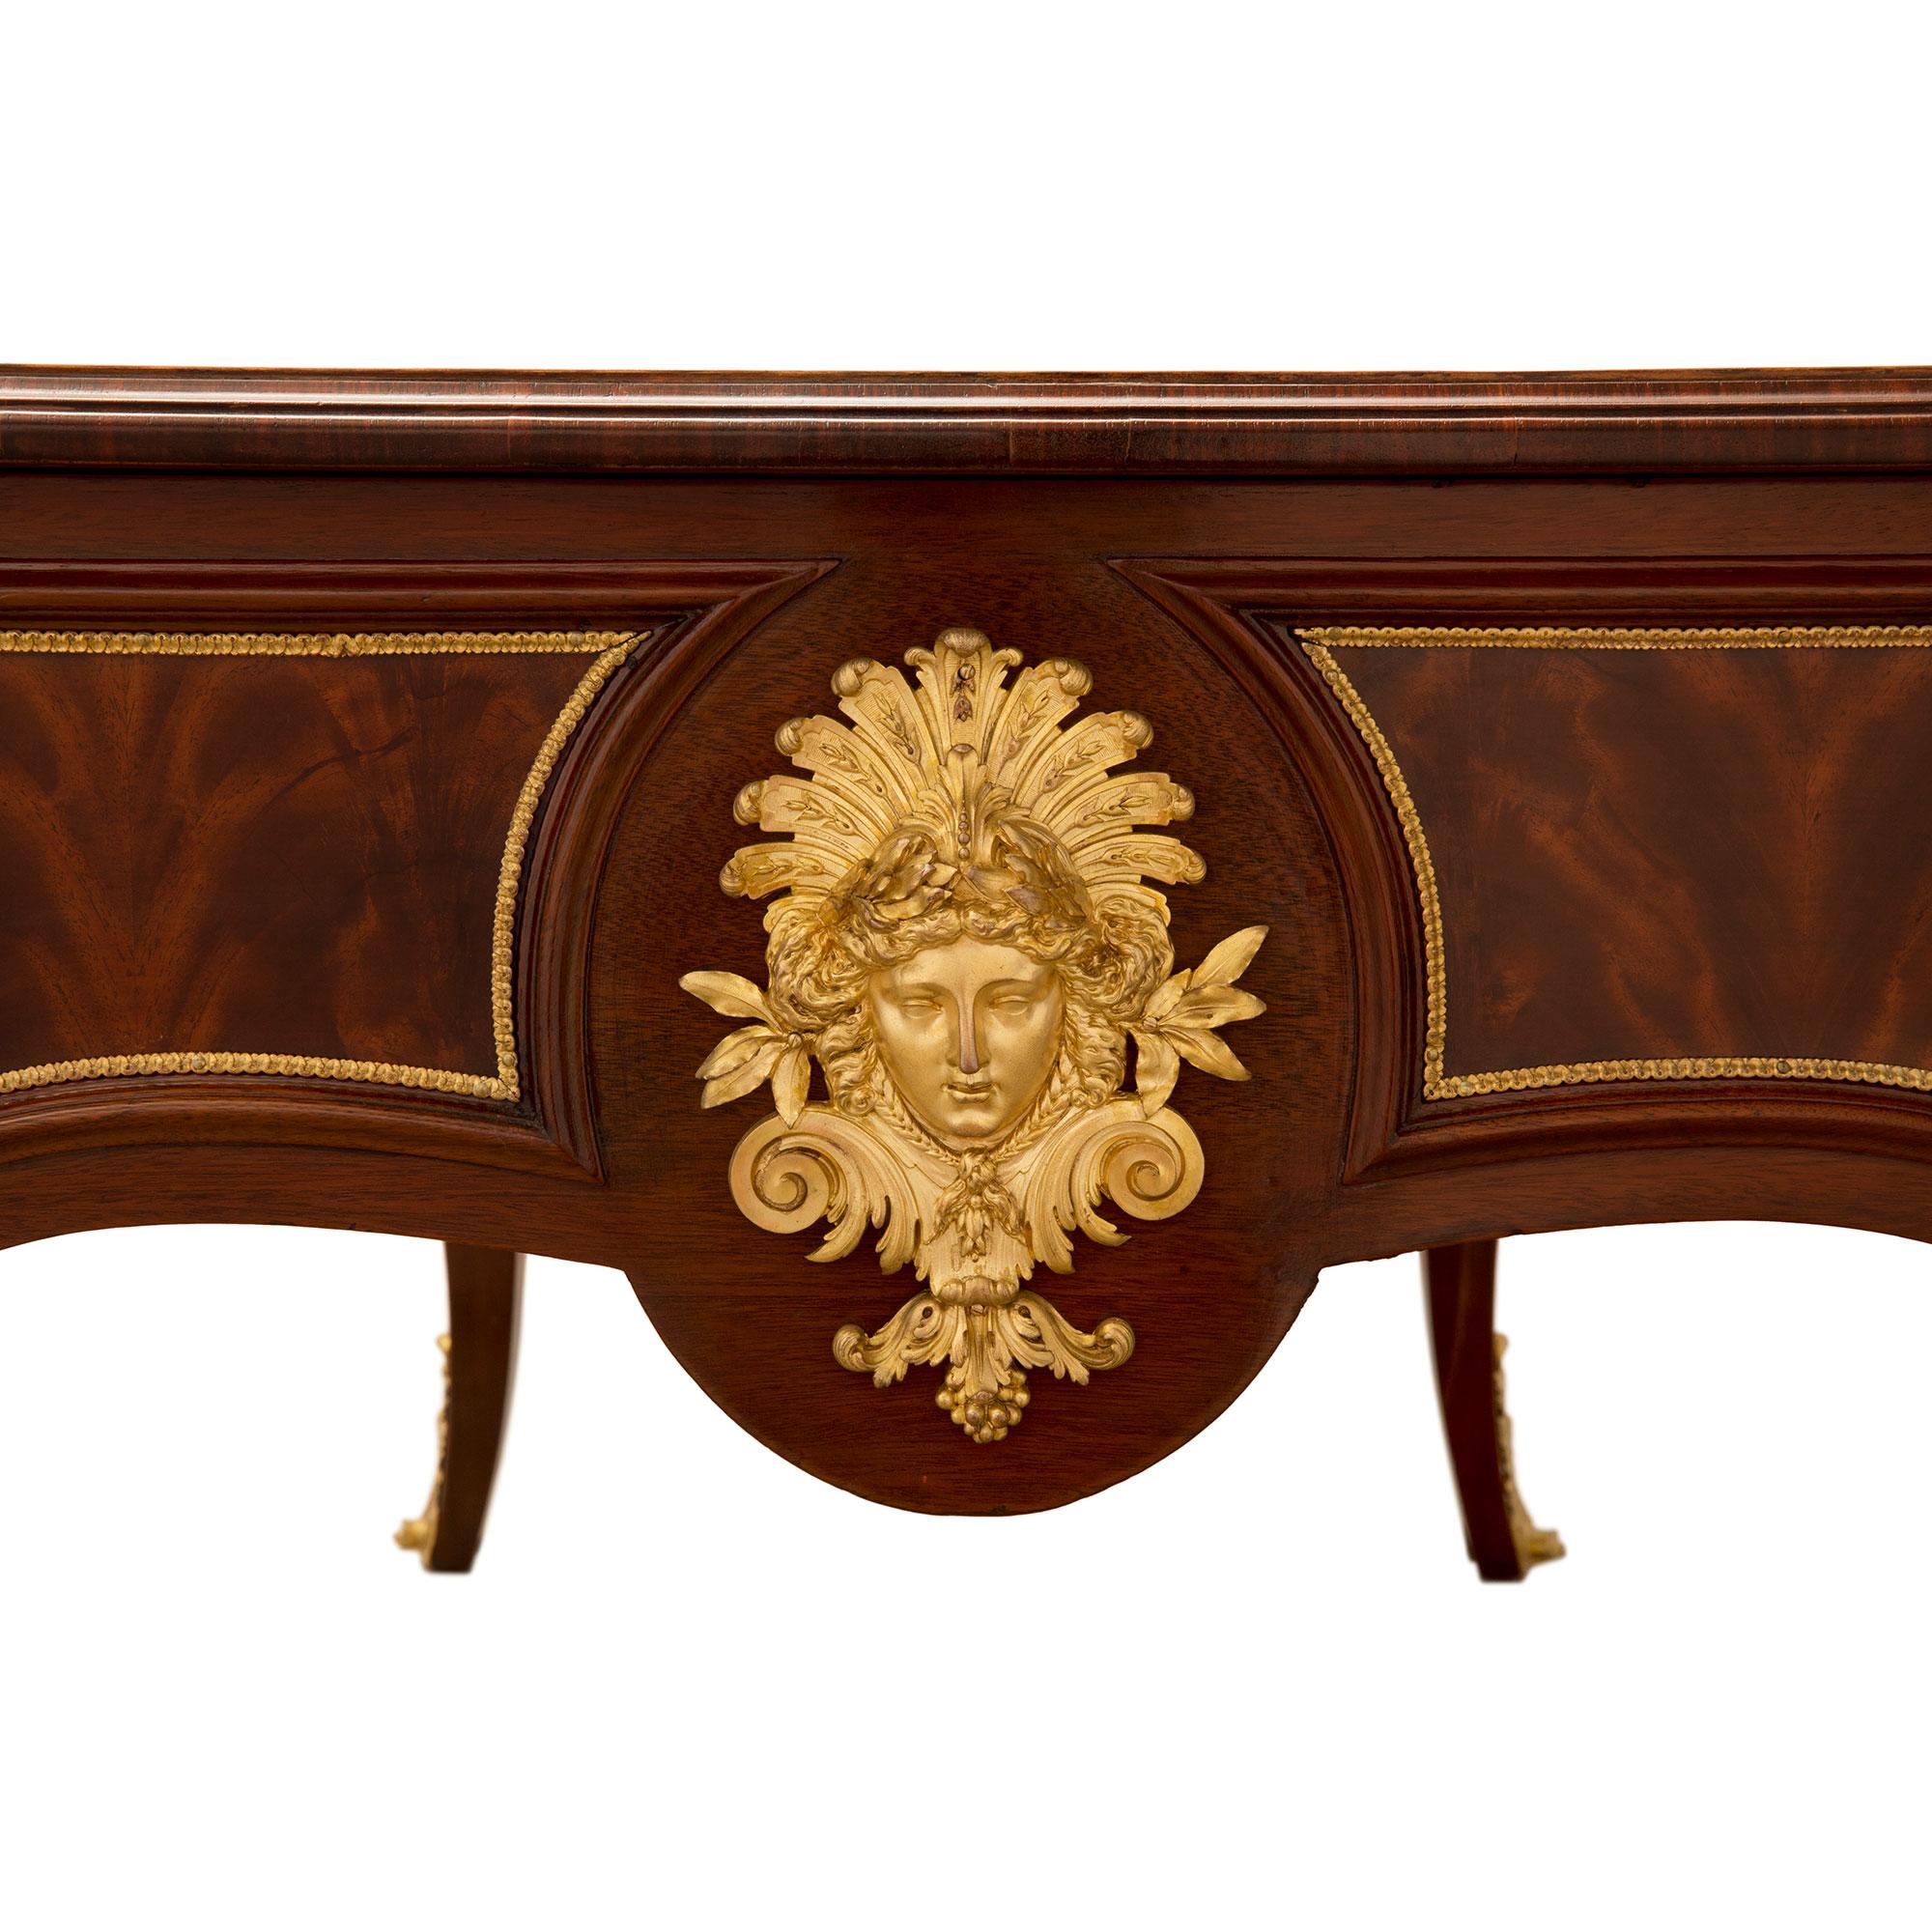 French 19th Century Louis XV Style Flamed Mahogany and Ormolu Bureau Plat Desk For Sale 6